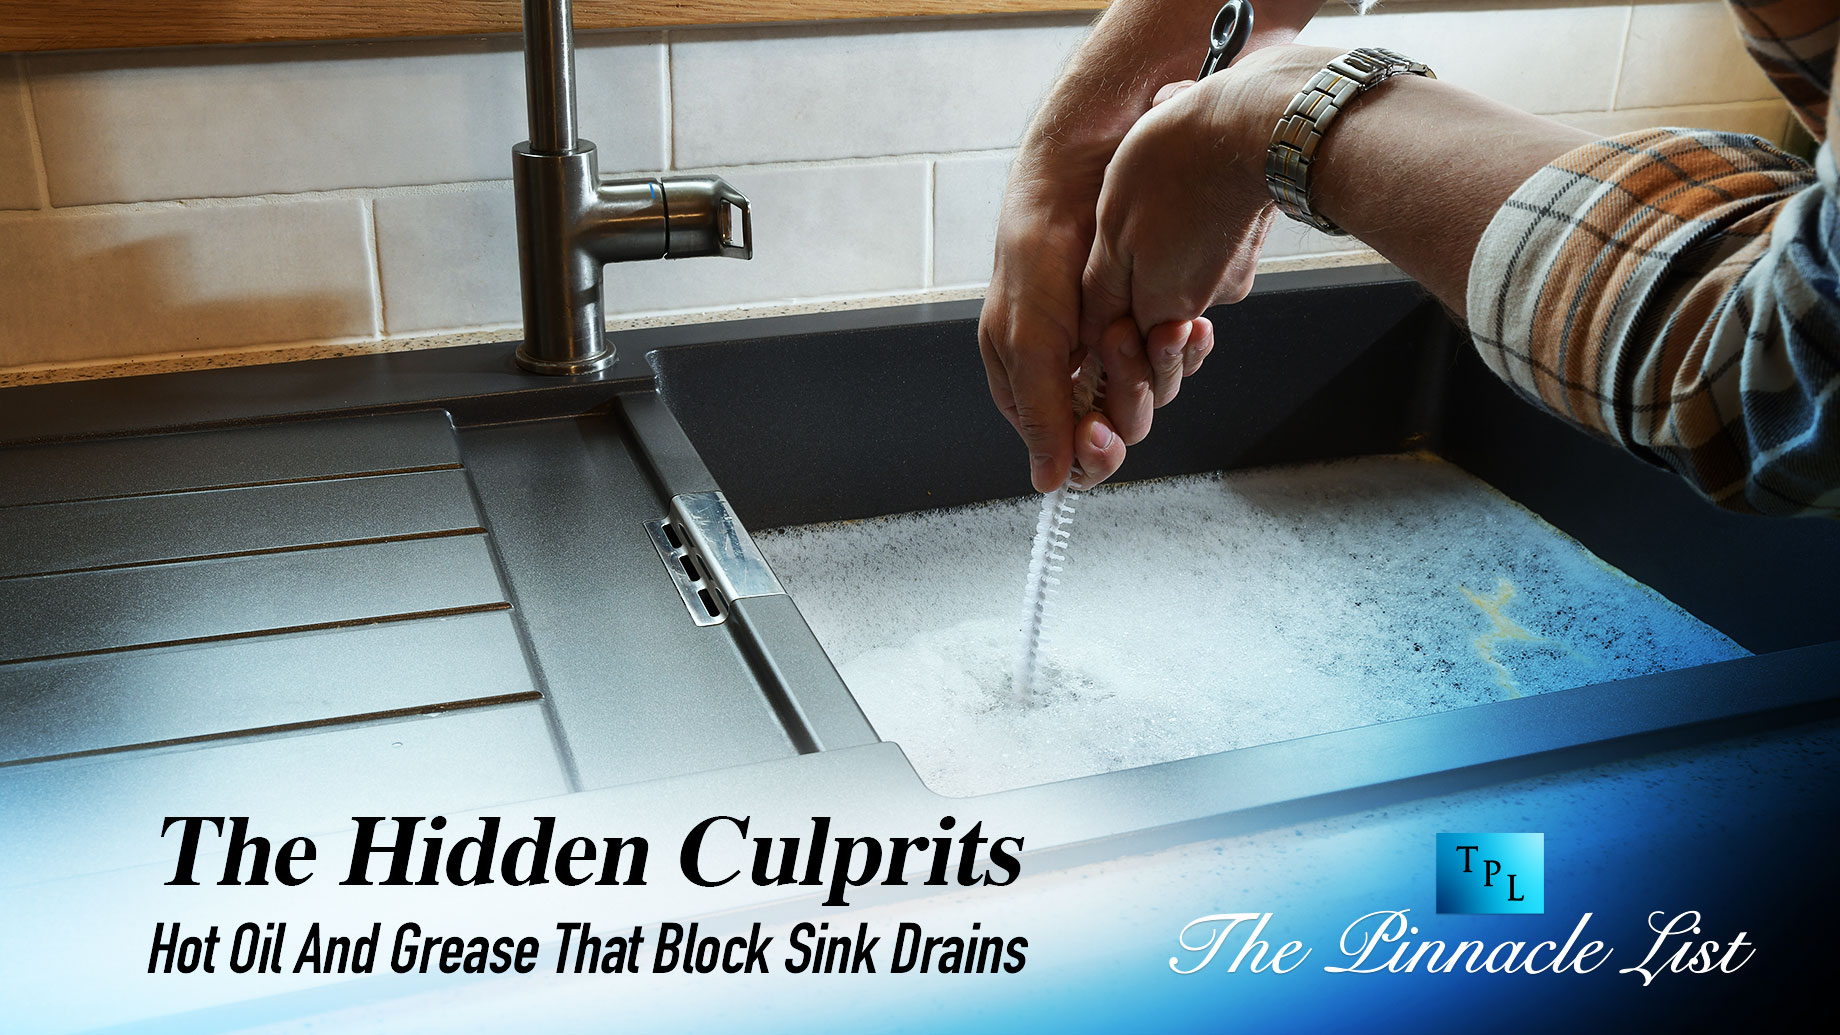 The Hidden Culprits - Hot Oil And Grease That Block Sink Drains